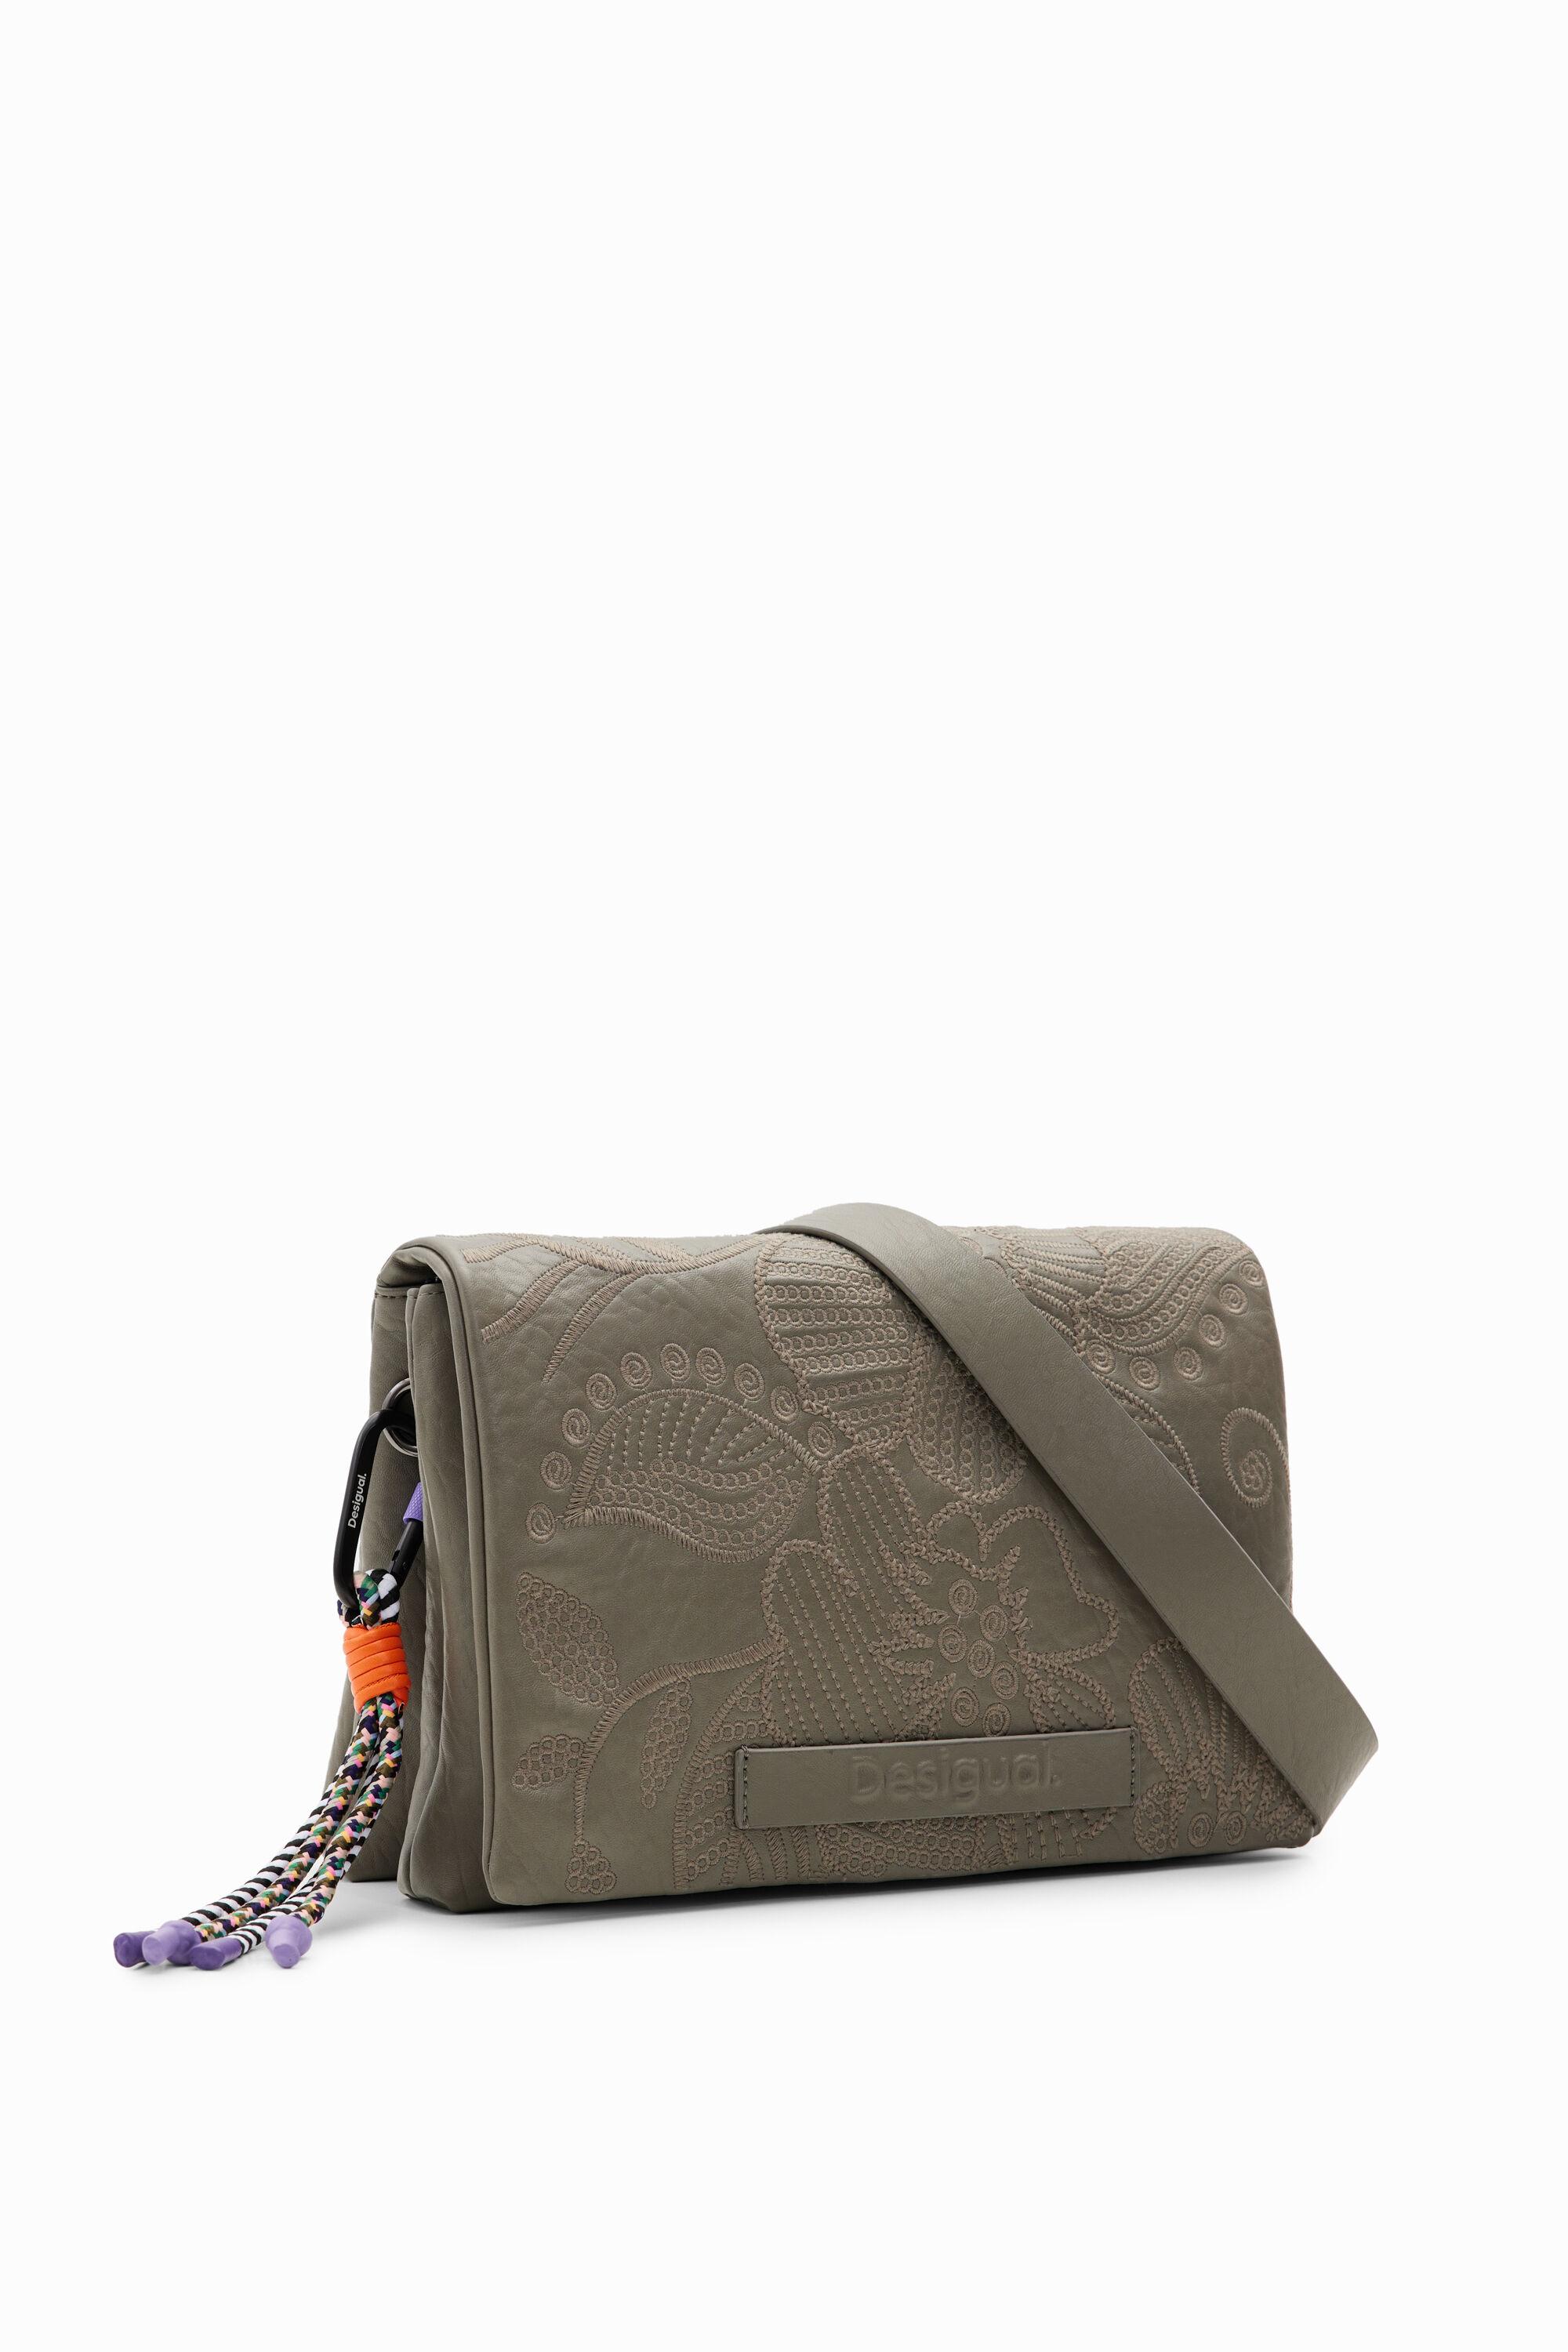 Desigual Midsize Floral Embroidery Crossbody Bag in Black | Lyst